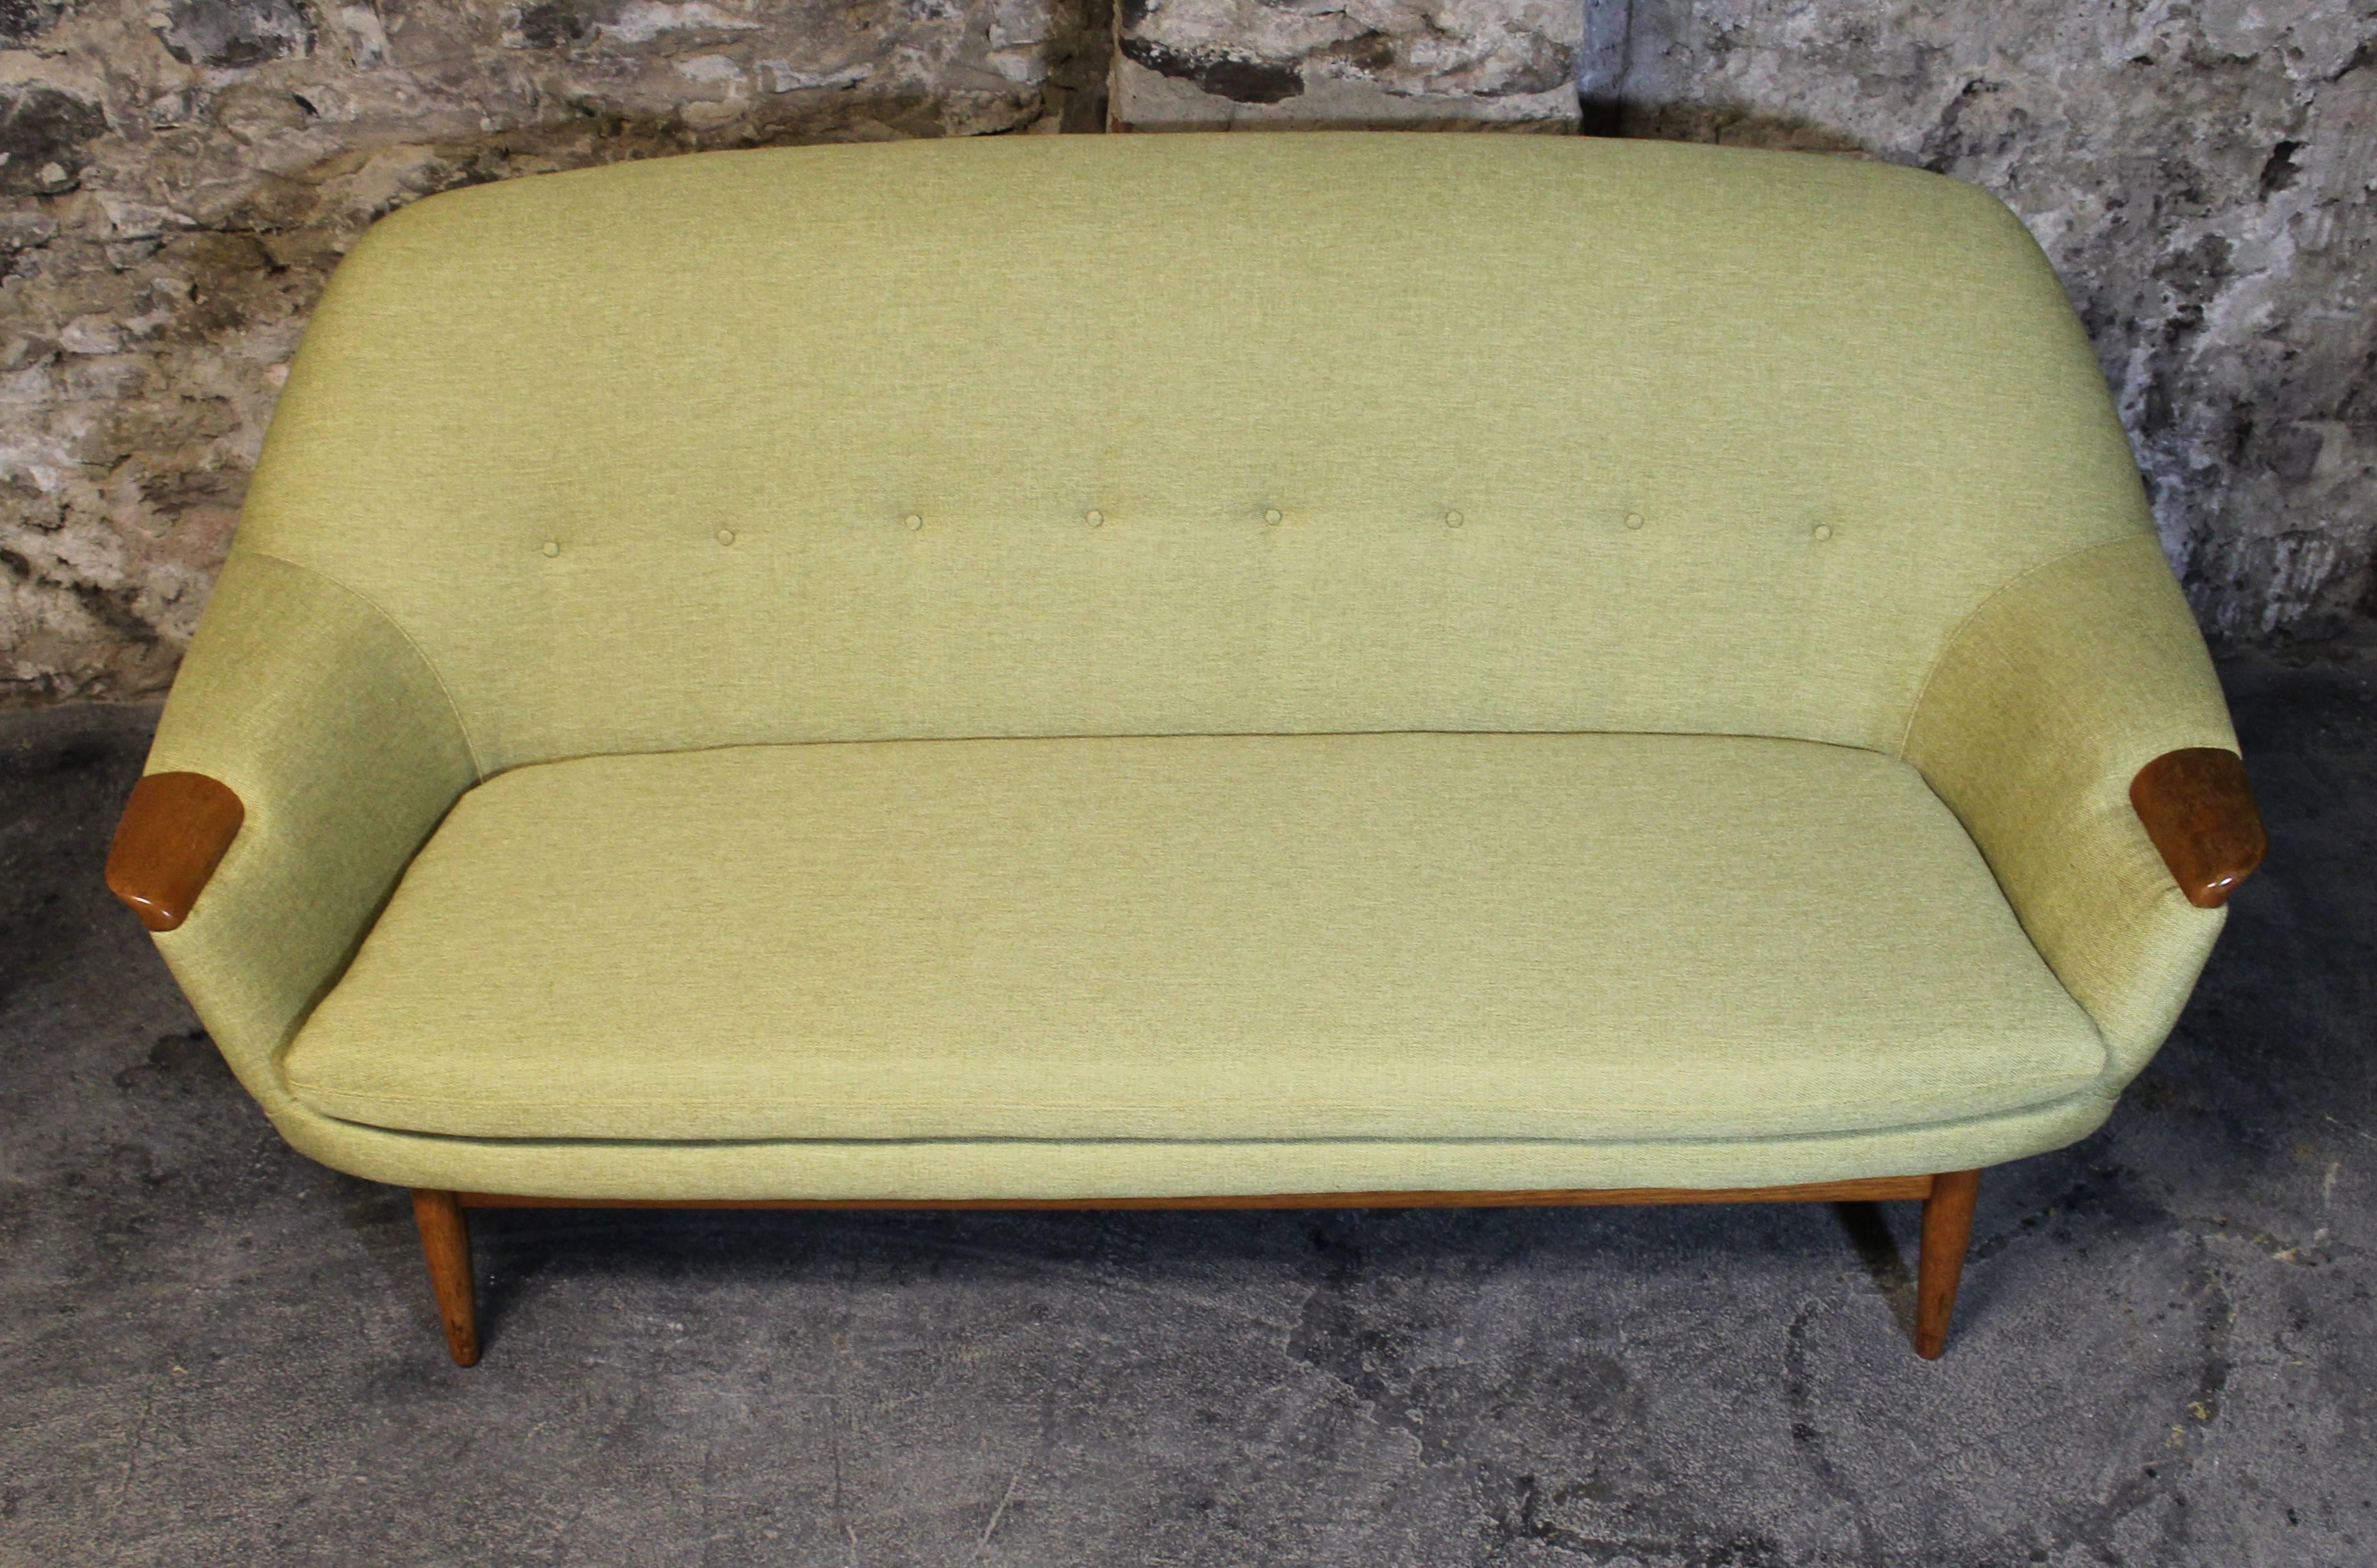 Gerhard Berg designed this scarce modernist sofa LK Hjelle of Norway in the golden age of Norwegian furniture design. It has been newly upholstered and sits on a teak base with tapered legs and sculpted 'paw' arms placed on either